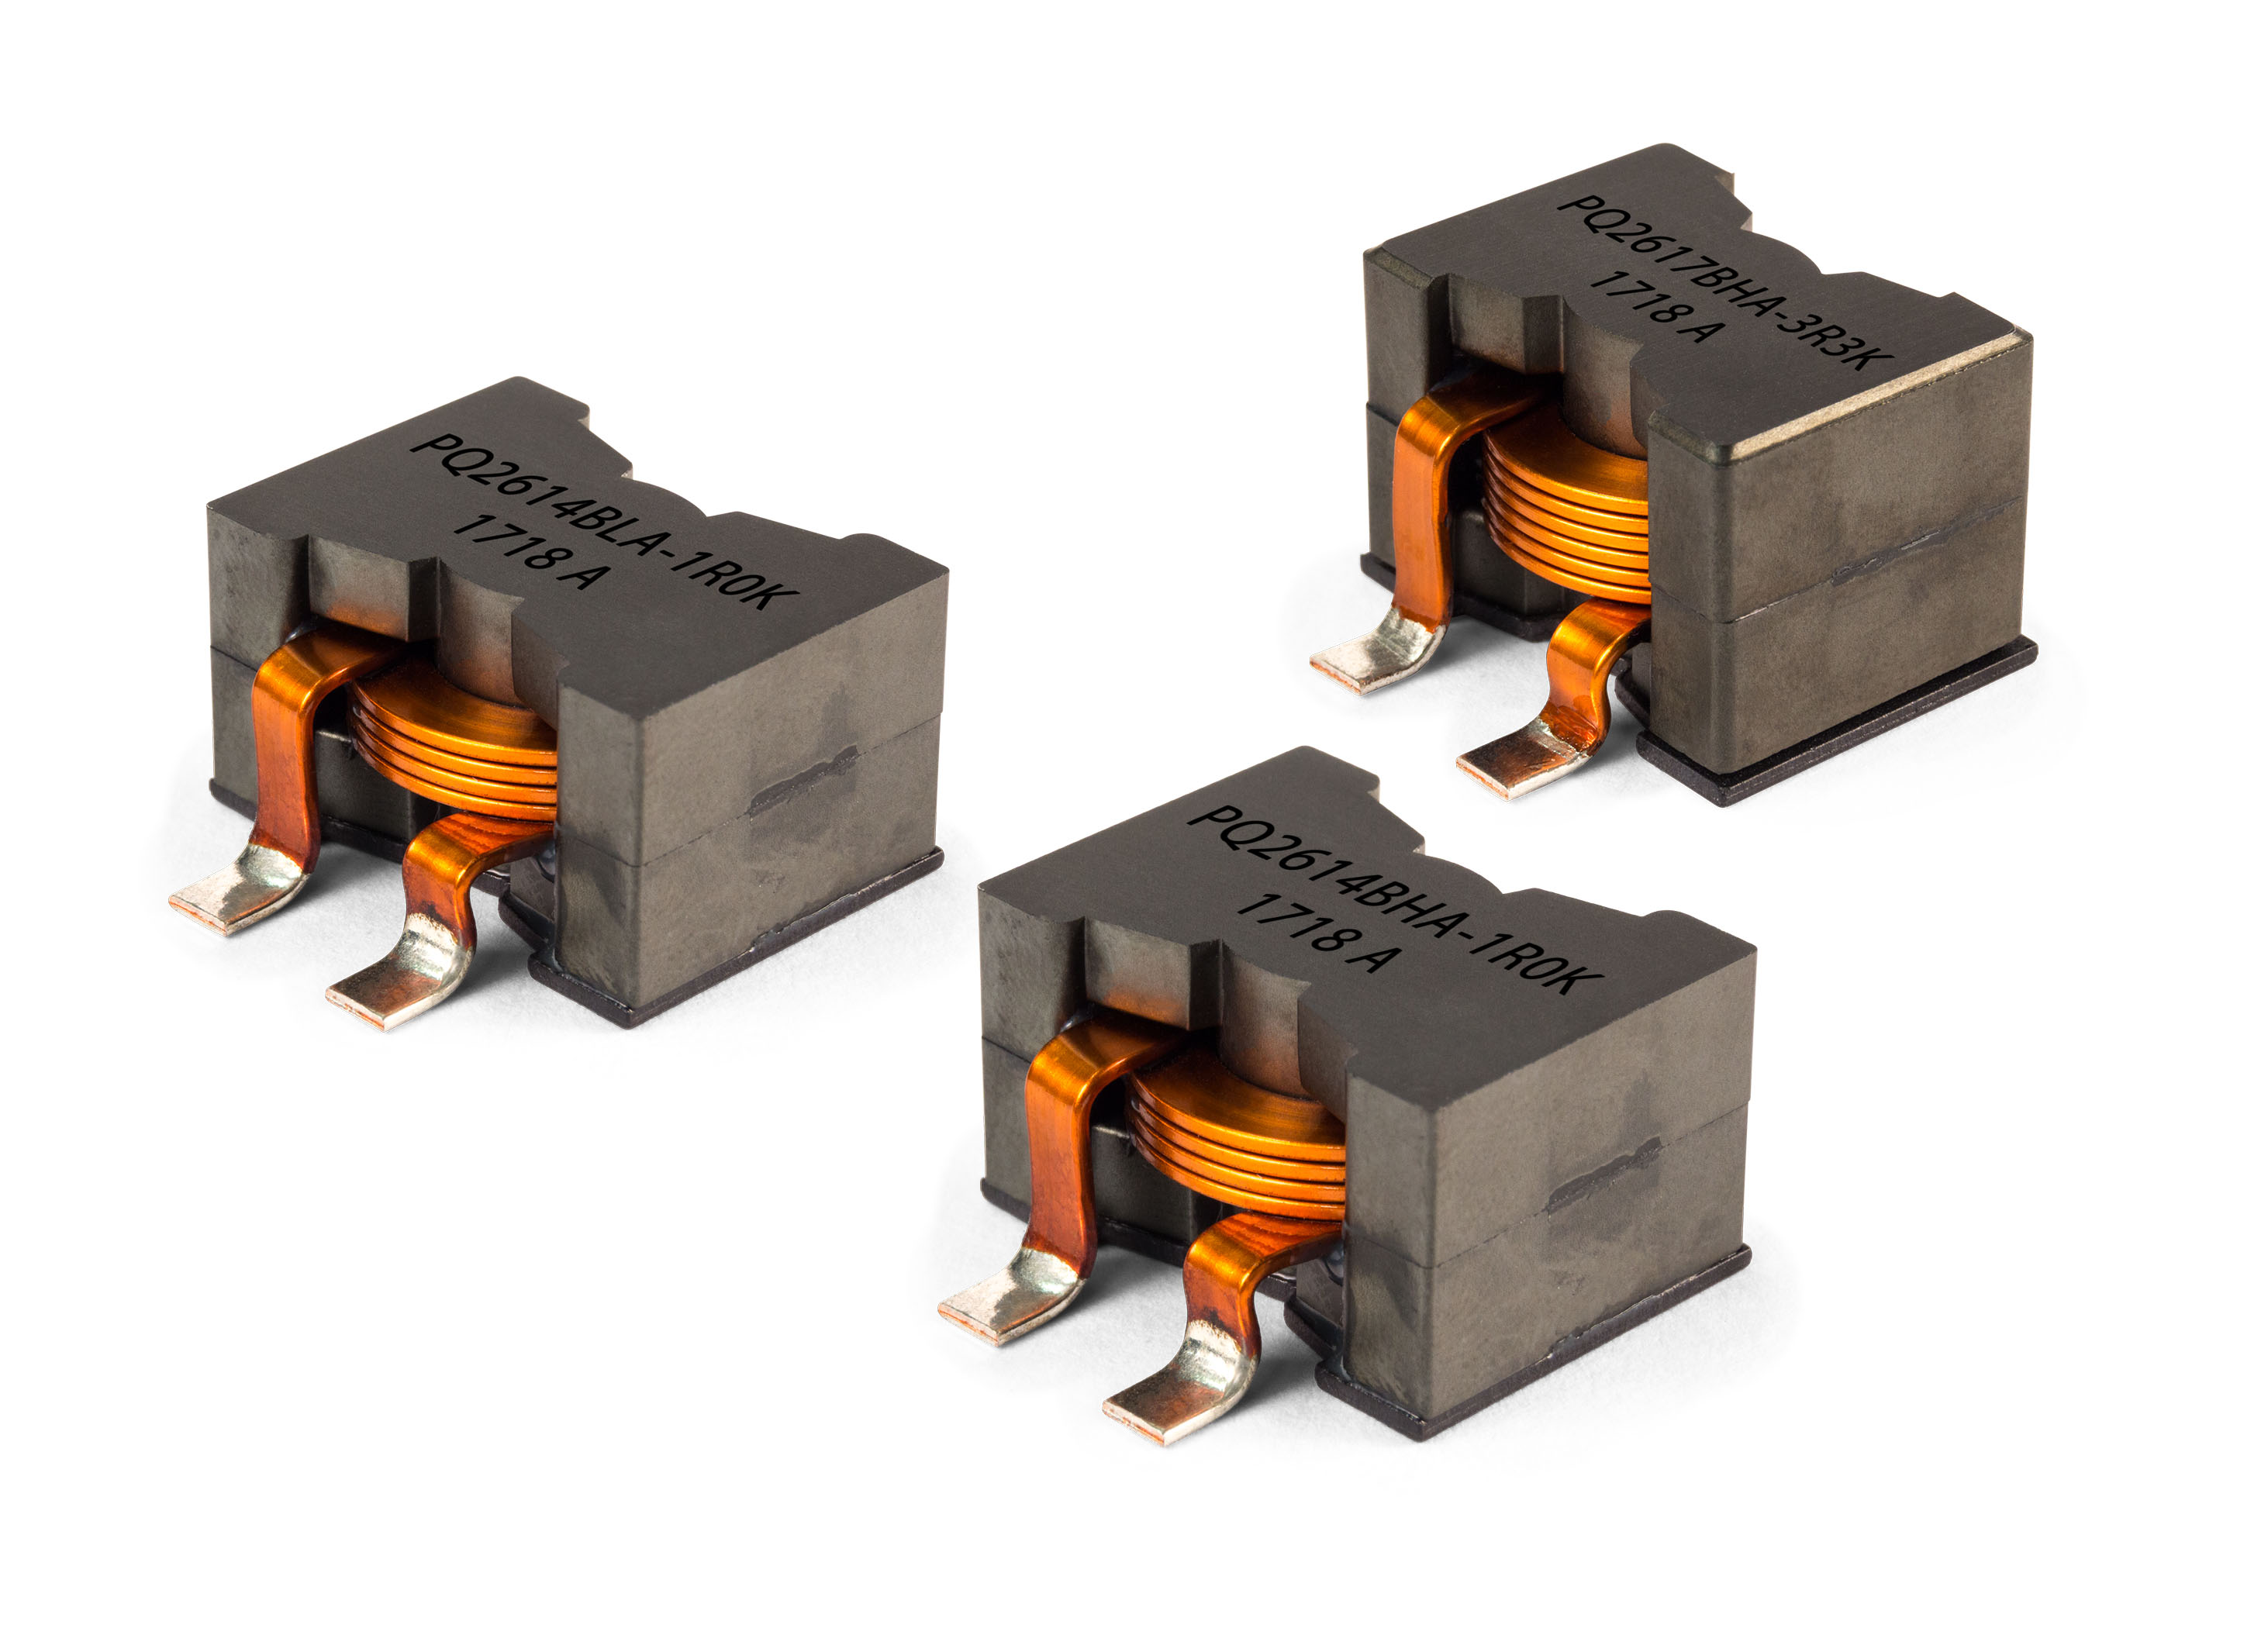 AEC-Q200-Qualified Power Inductors Offer Exceptionally Low Resistance, High Saturation Current